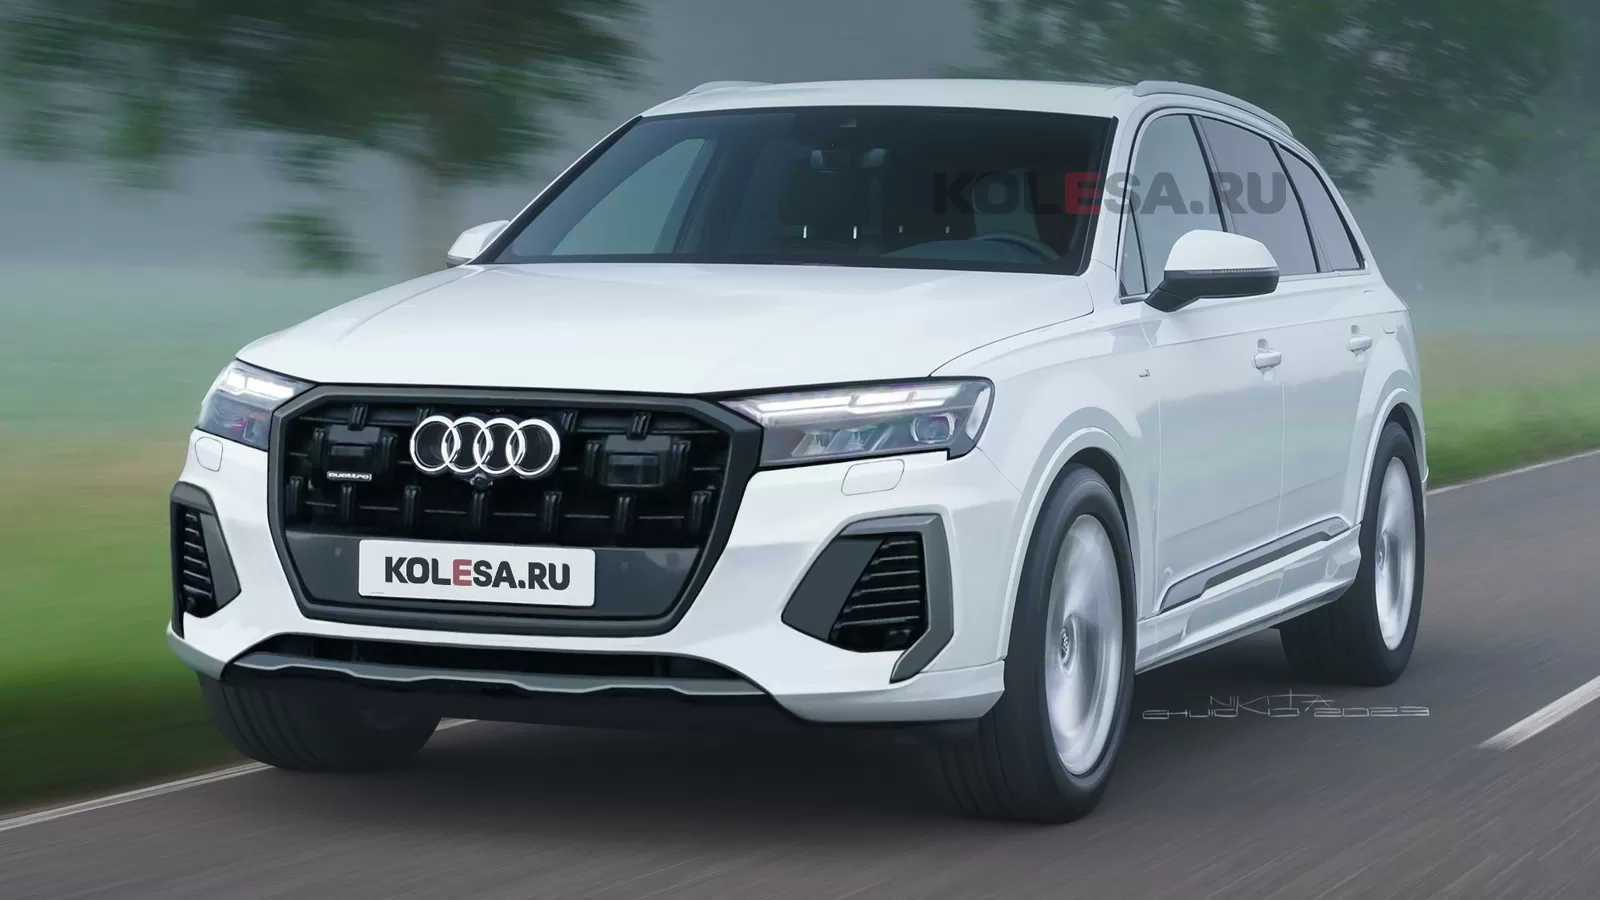 The new Audi Q7 showed on high-quality images